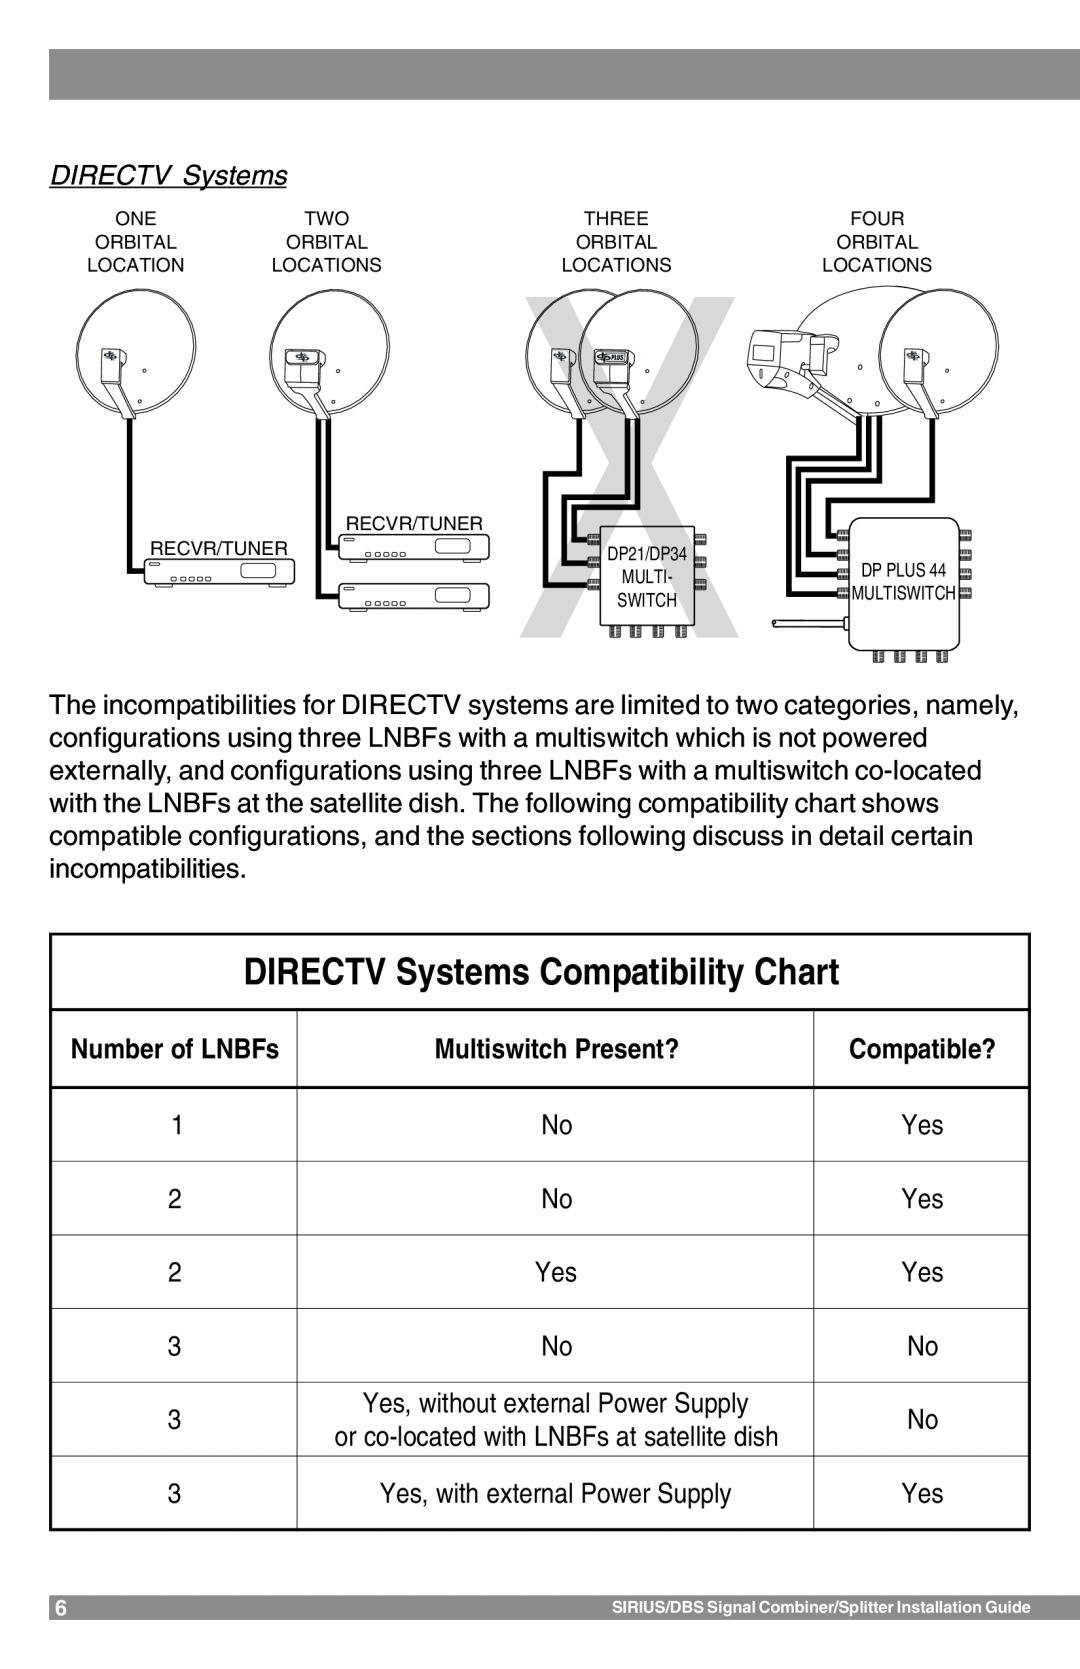 Sirius Satellite Radio SR-100C Number of LNBFs, DIRECTV Systems Compatibility Chart, Multiswitch Present?, Compatible? 